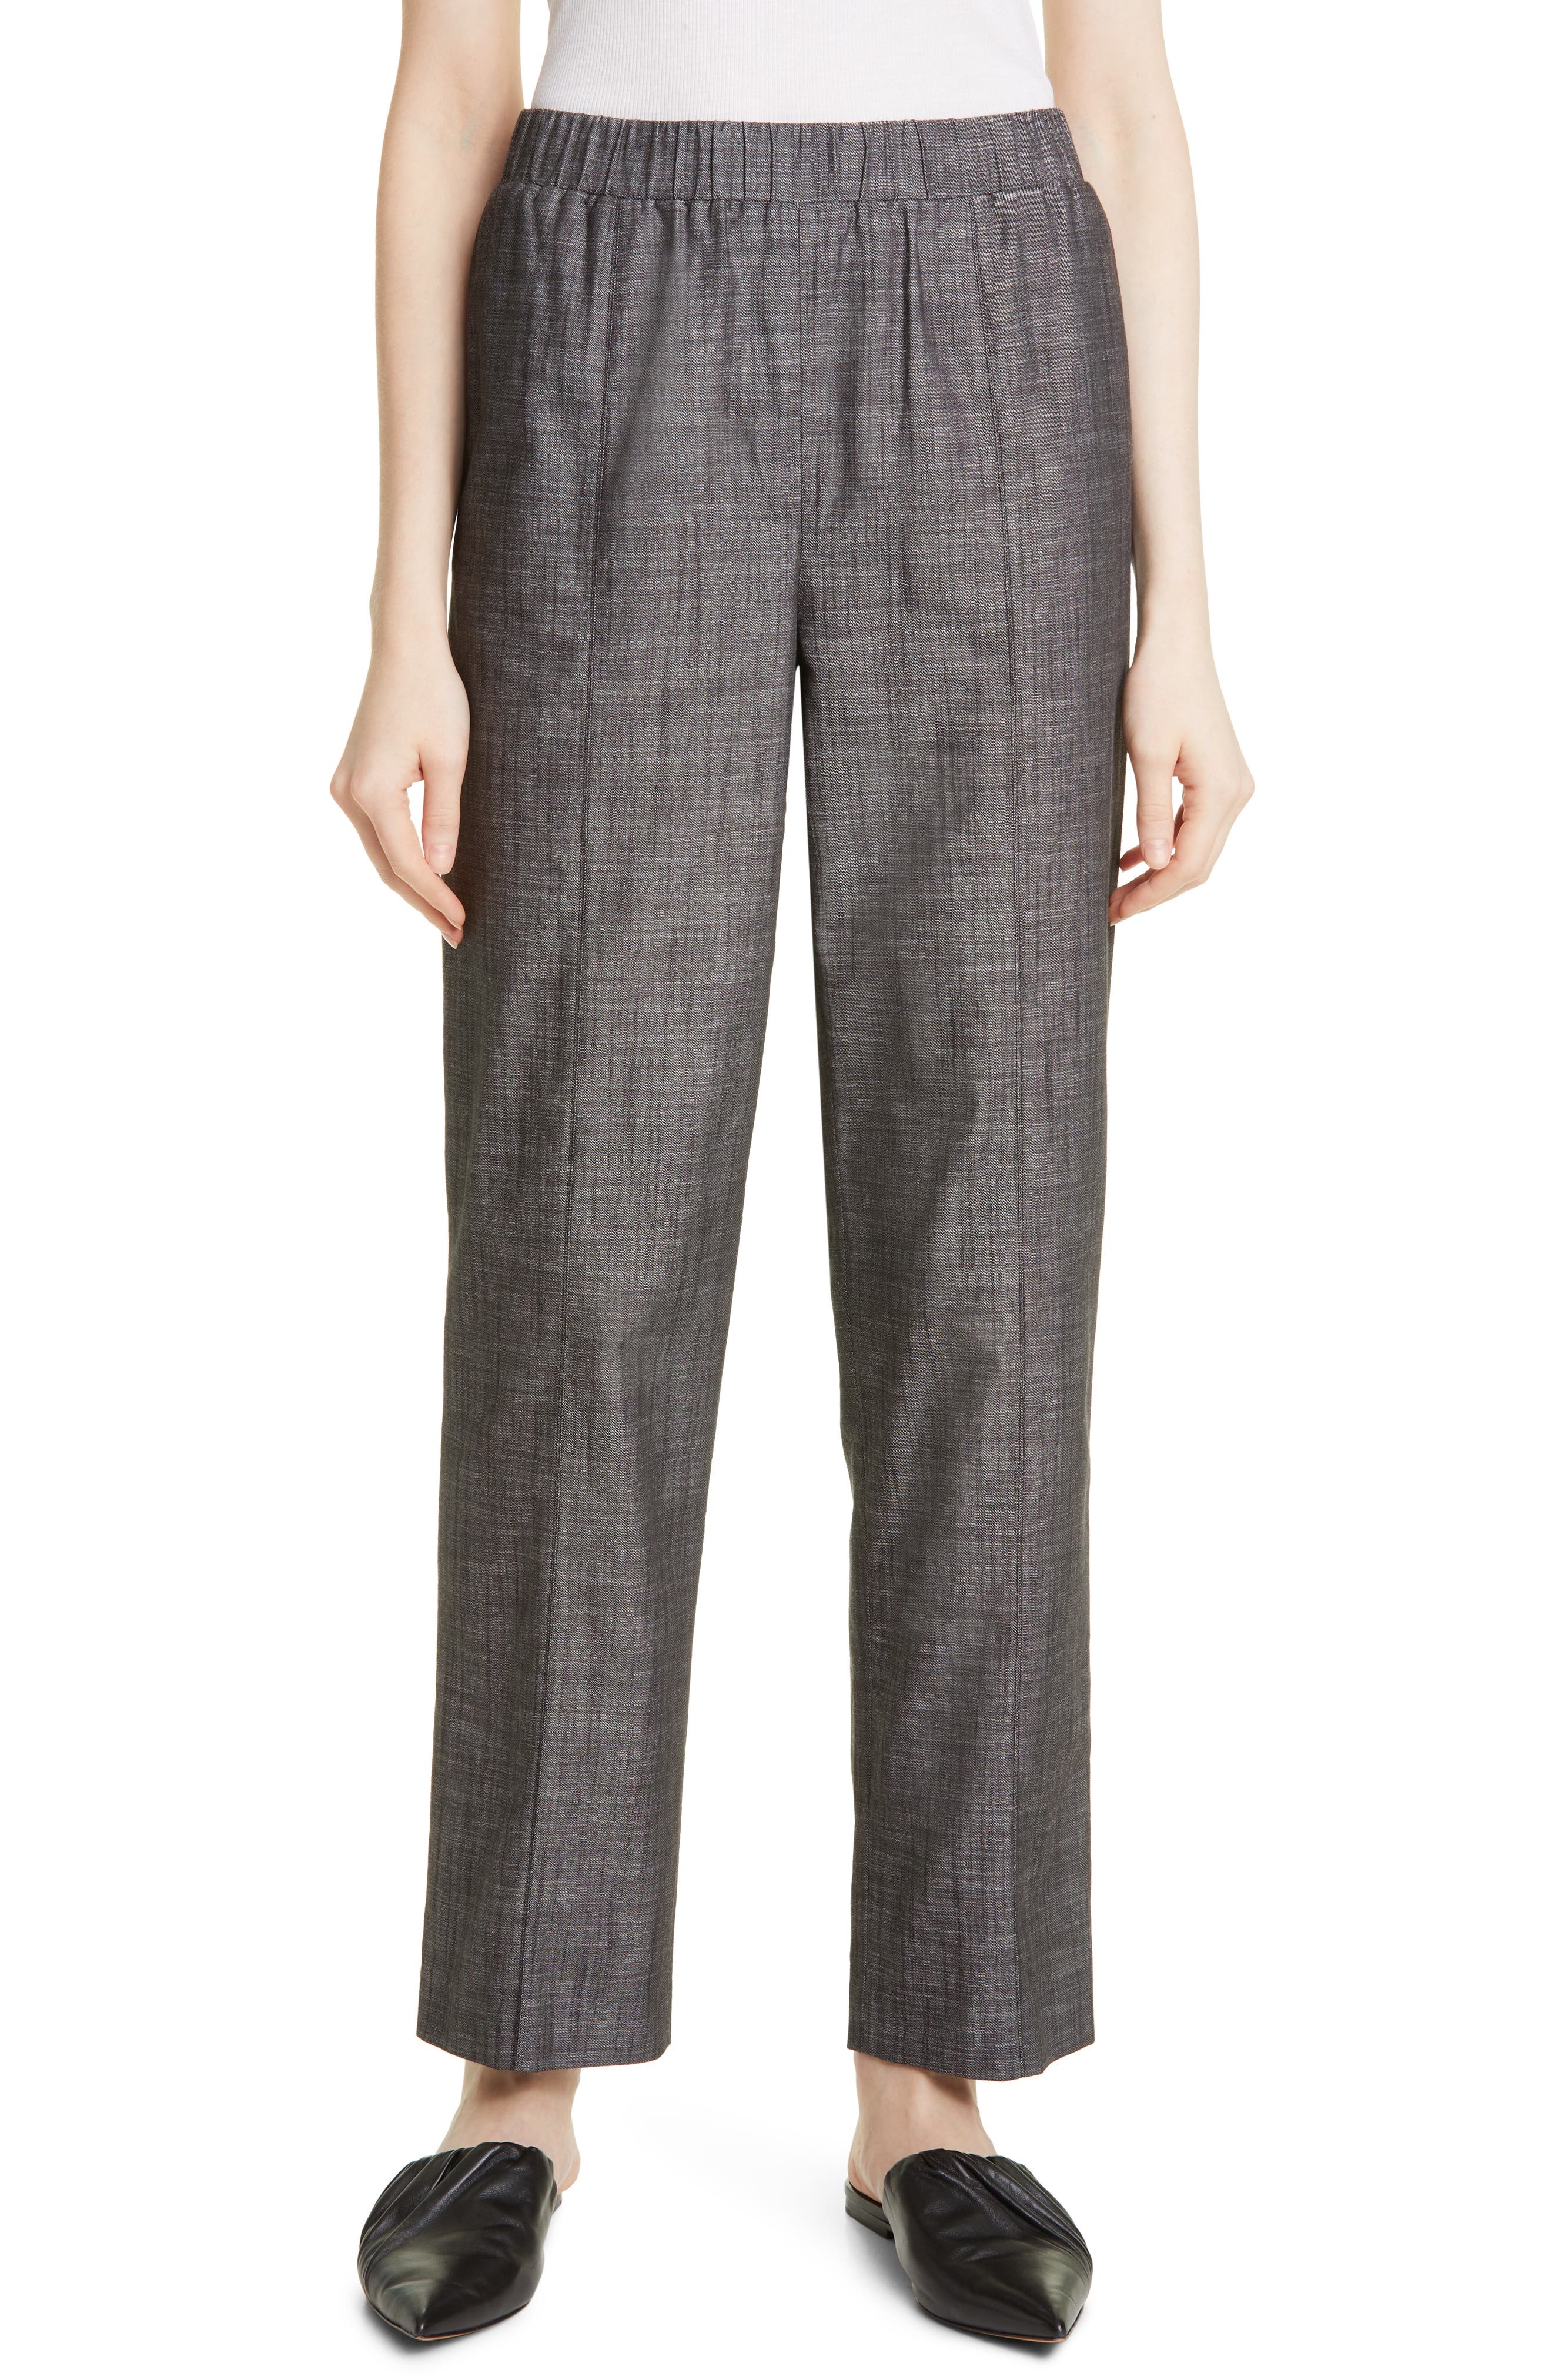 Maison Scotch Low-Rise Trousers grey-dark orange striped pattern athletic style Fashion Trousers Low-Rise Trousers 